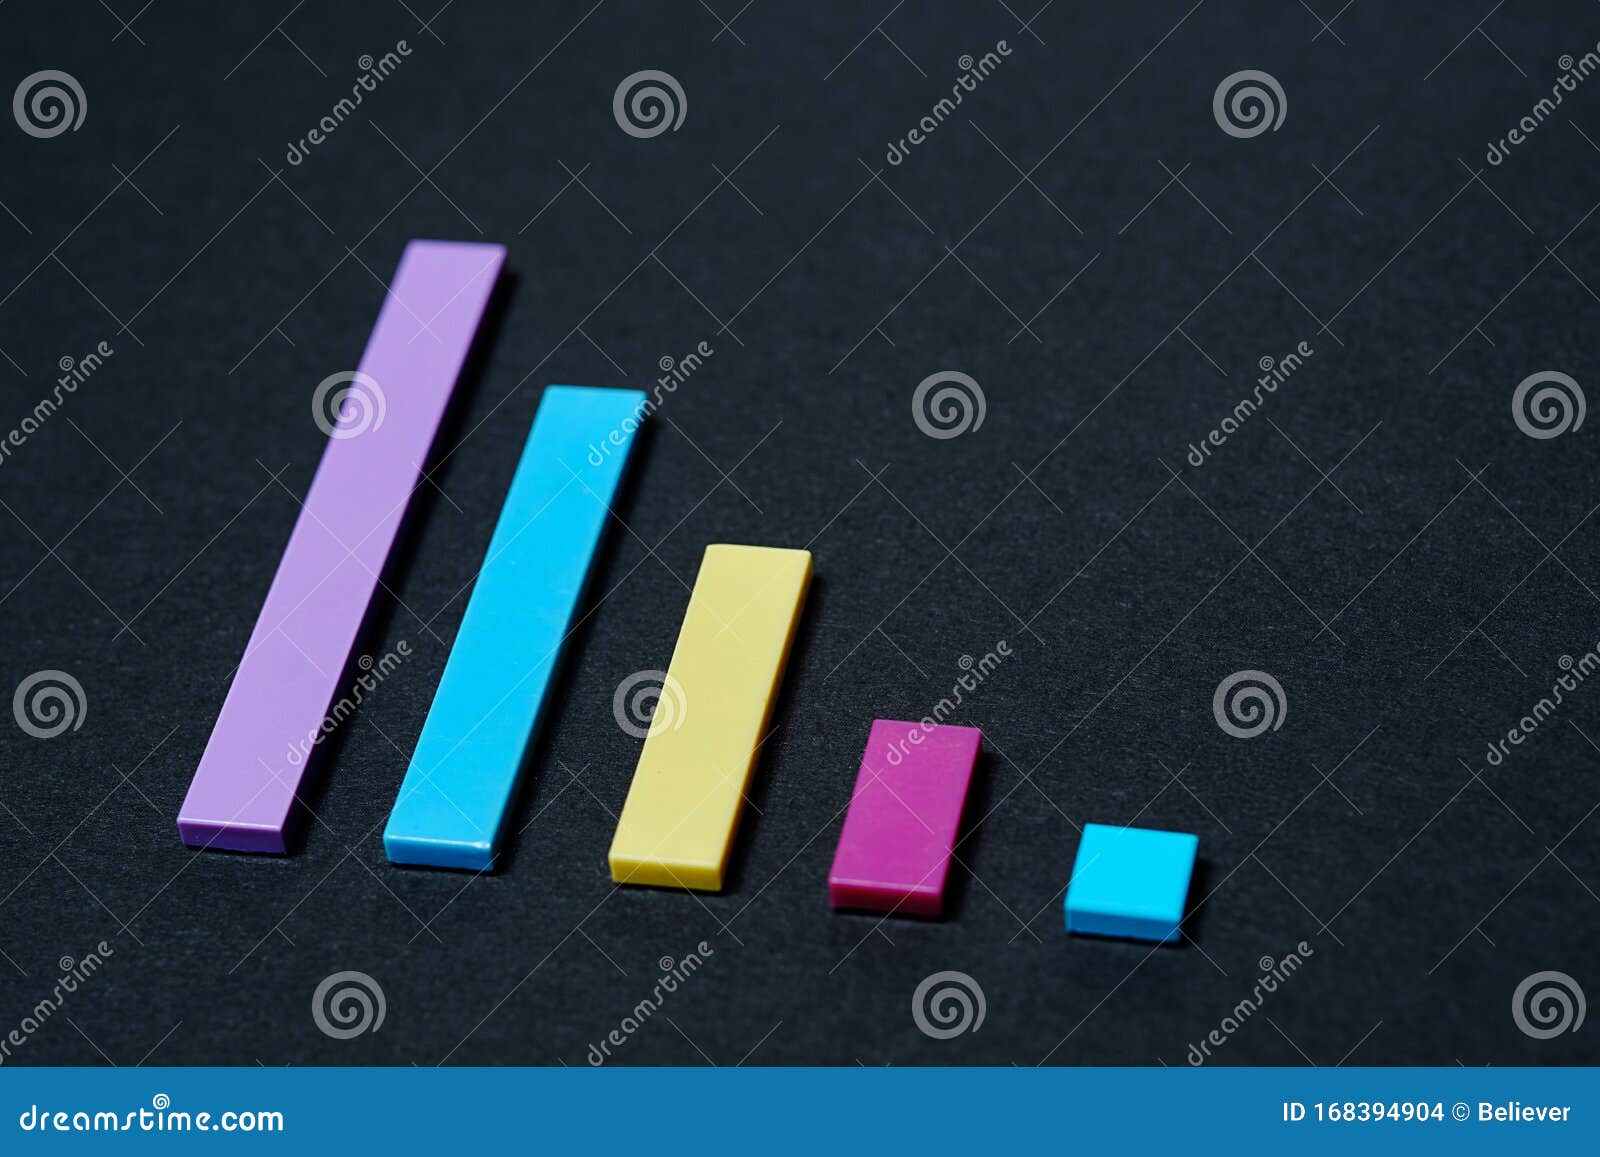 Colored Decline Graph On A Black Background Colored Blocks On A